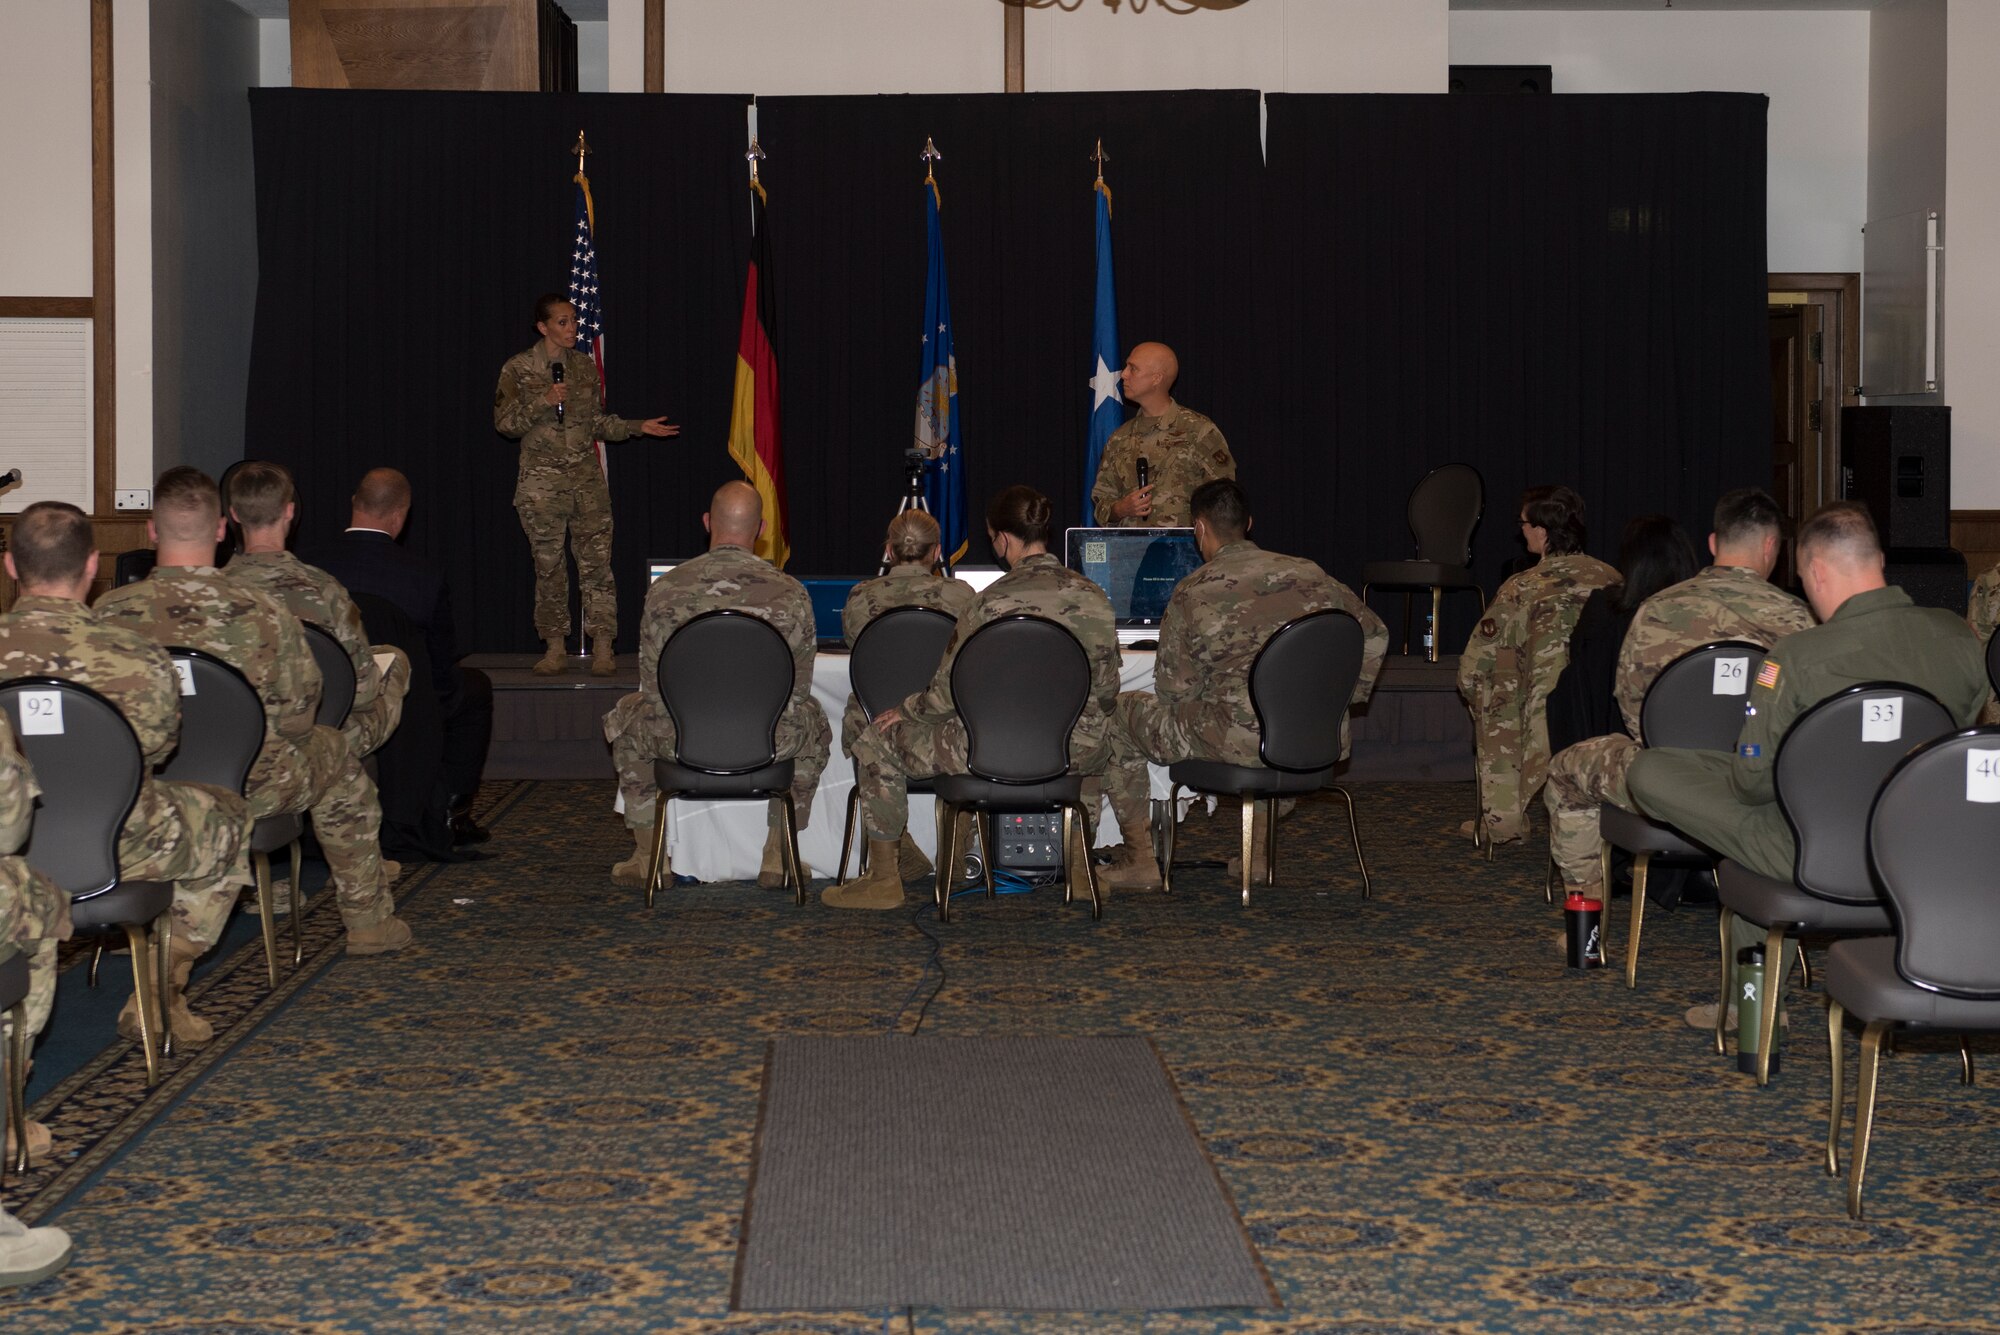 86th AW command chief speaks to Airmen.